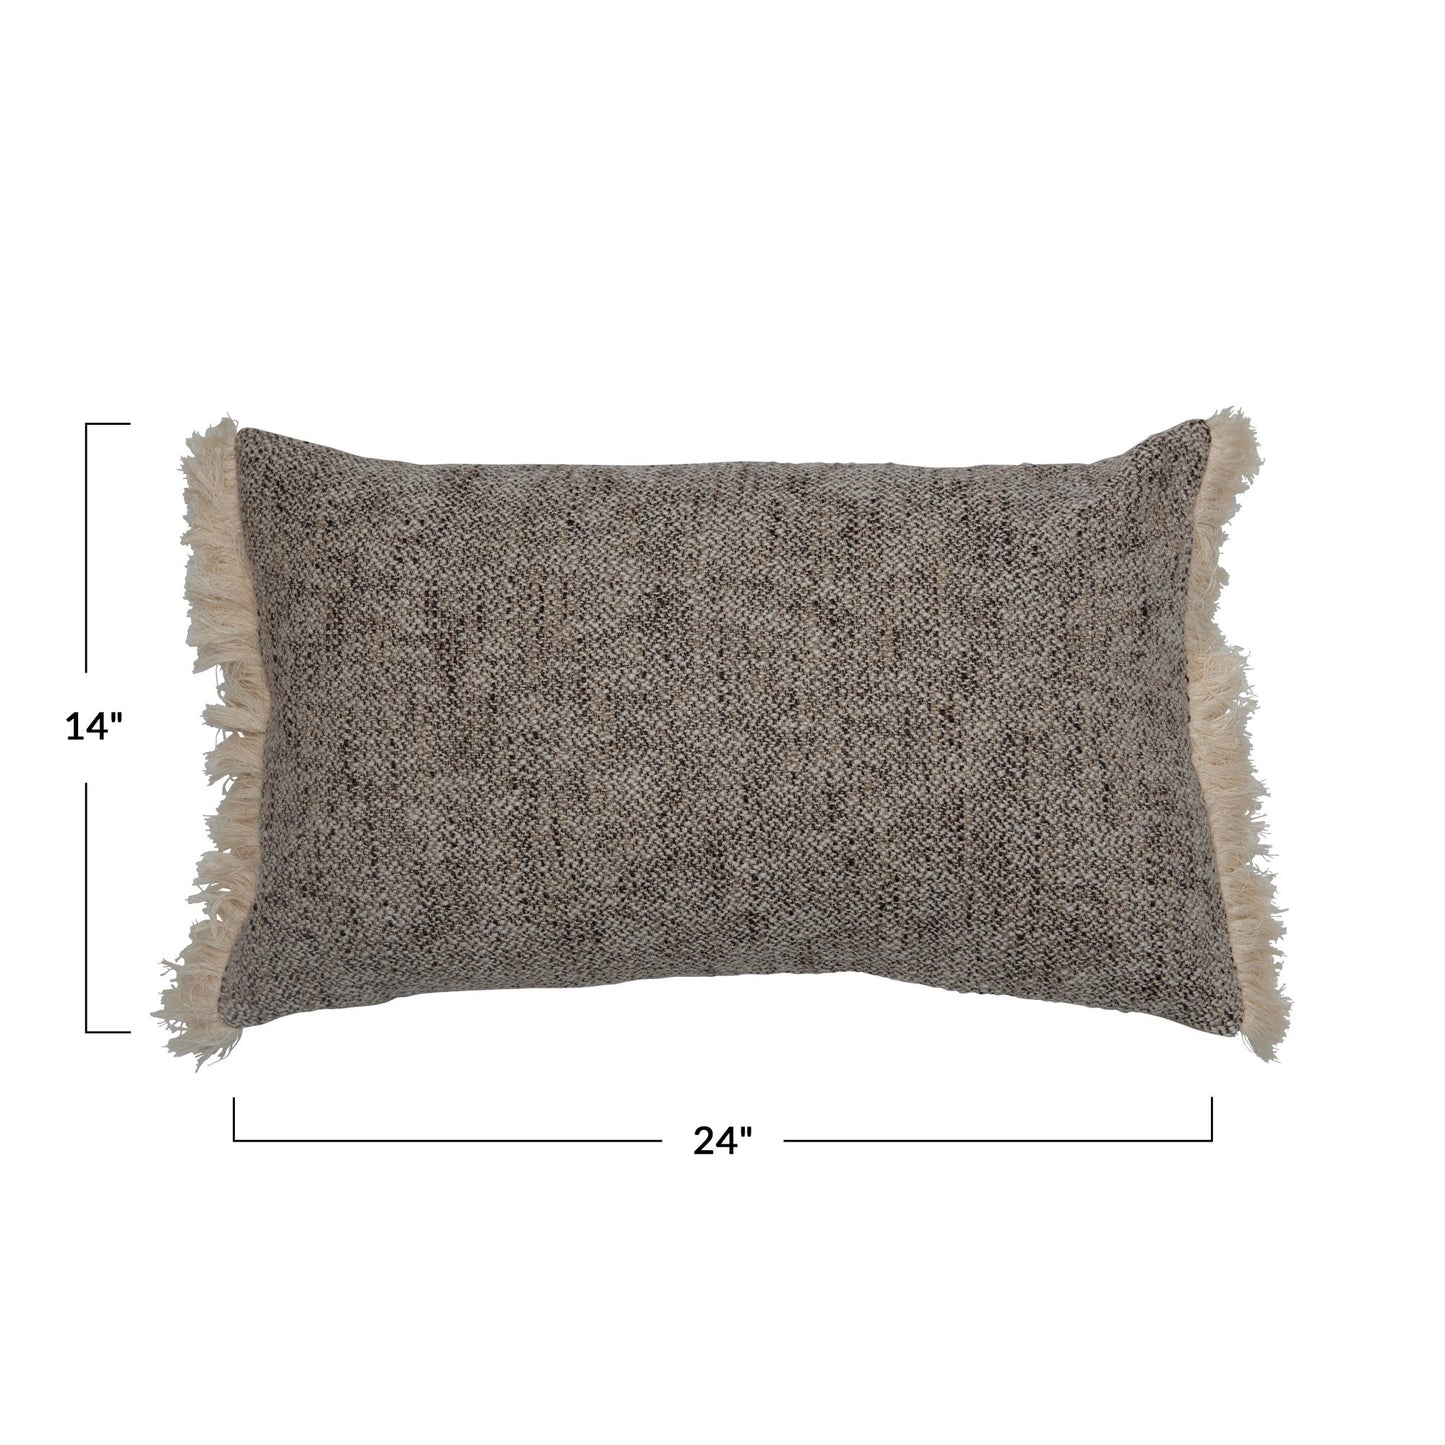 Cotton Lumbar Pillow with Chambray Back and Fringe